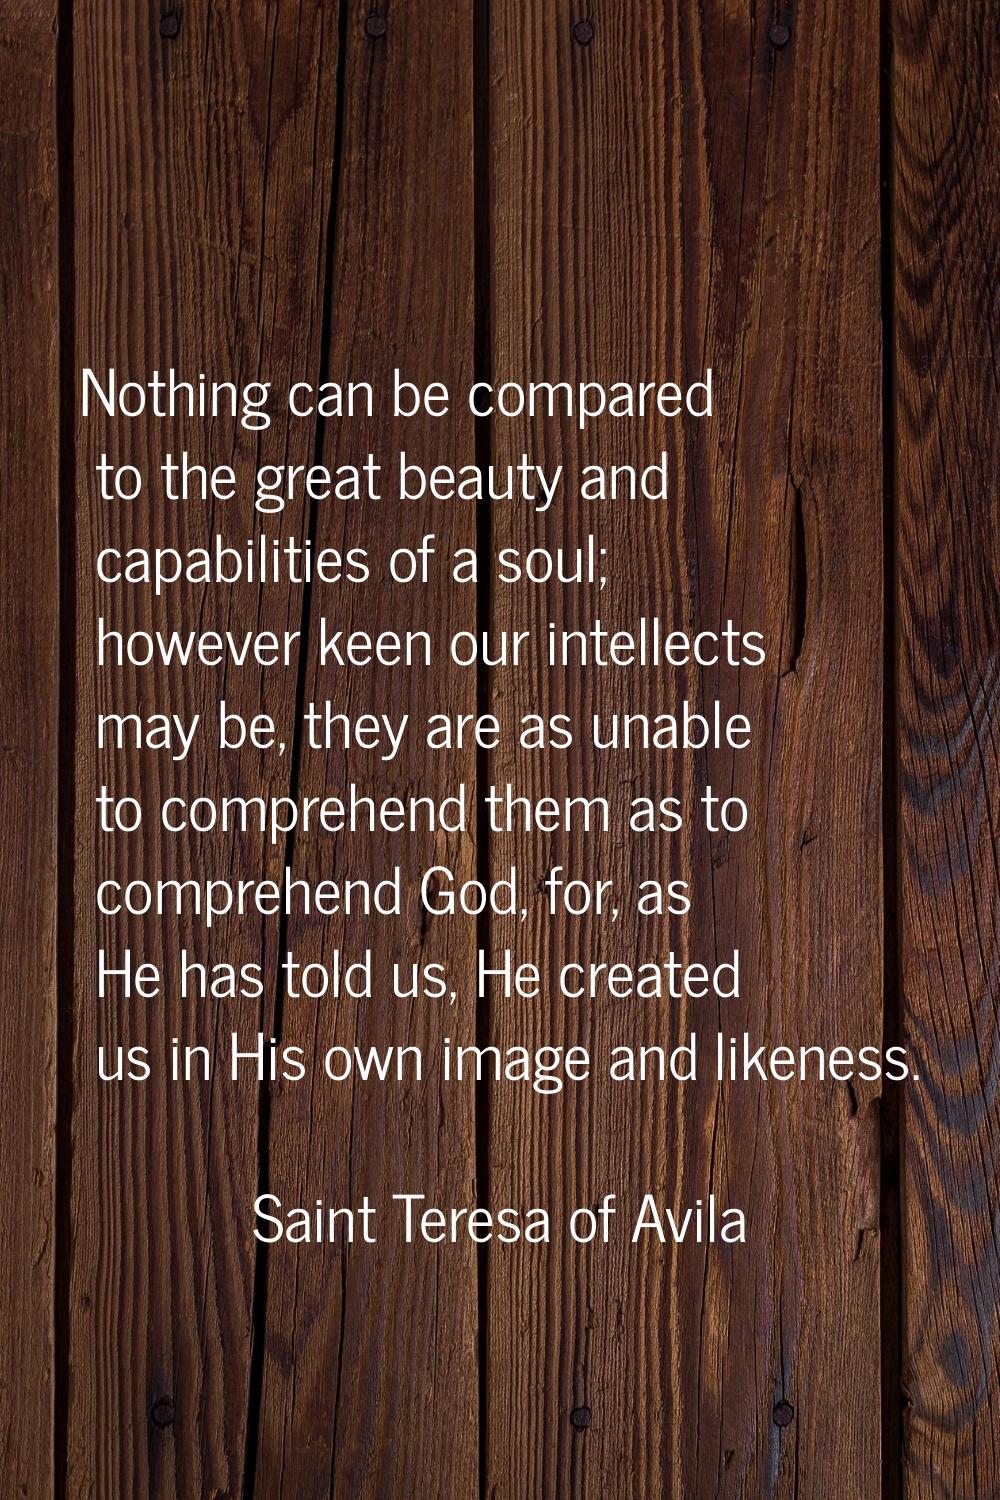 Nothing can be compared to the great beauty and capabilities of a soul; however keen our intellects